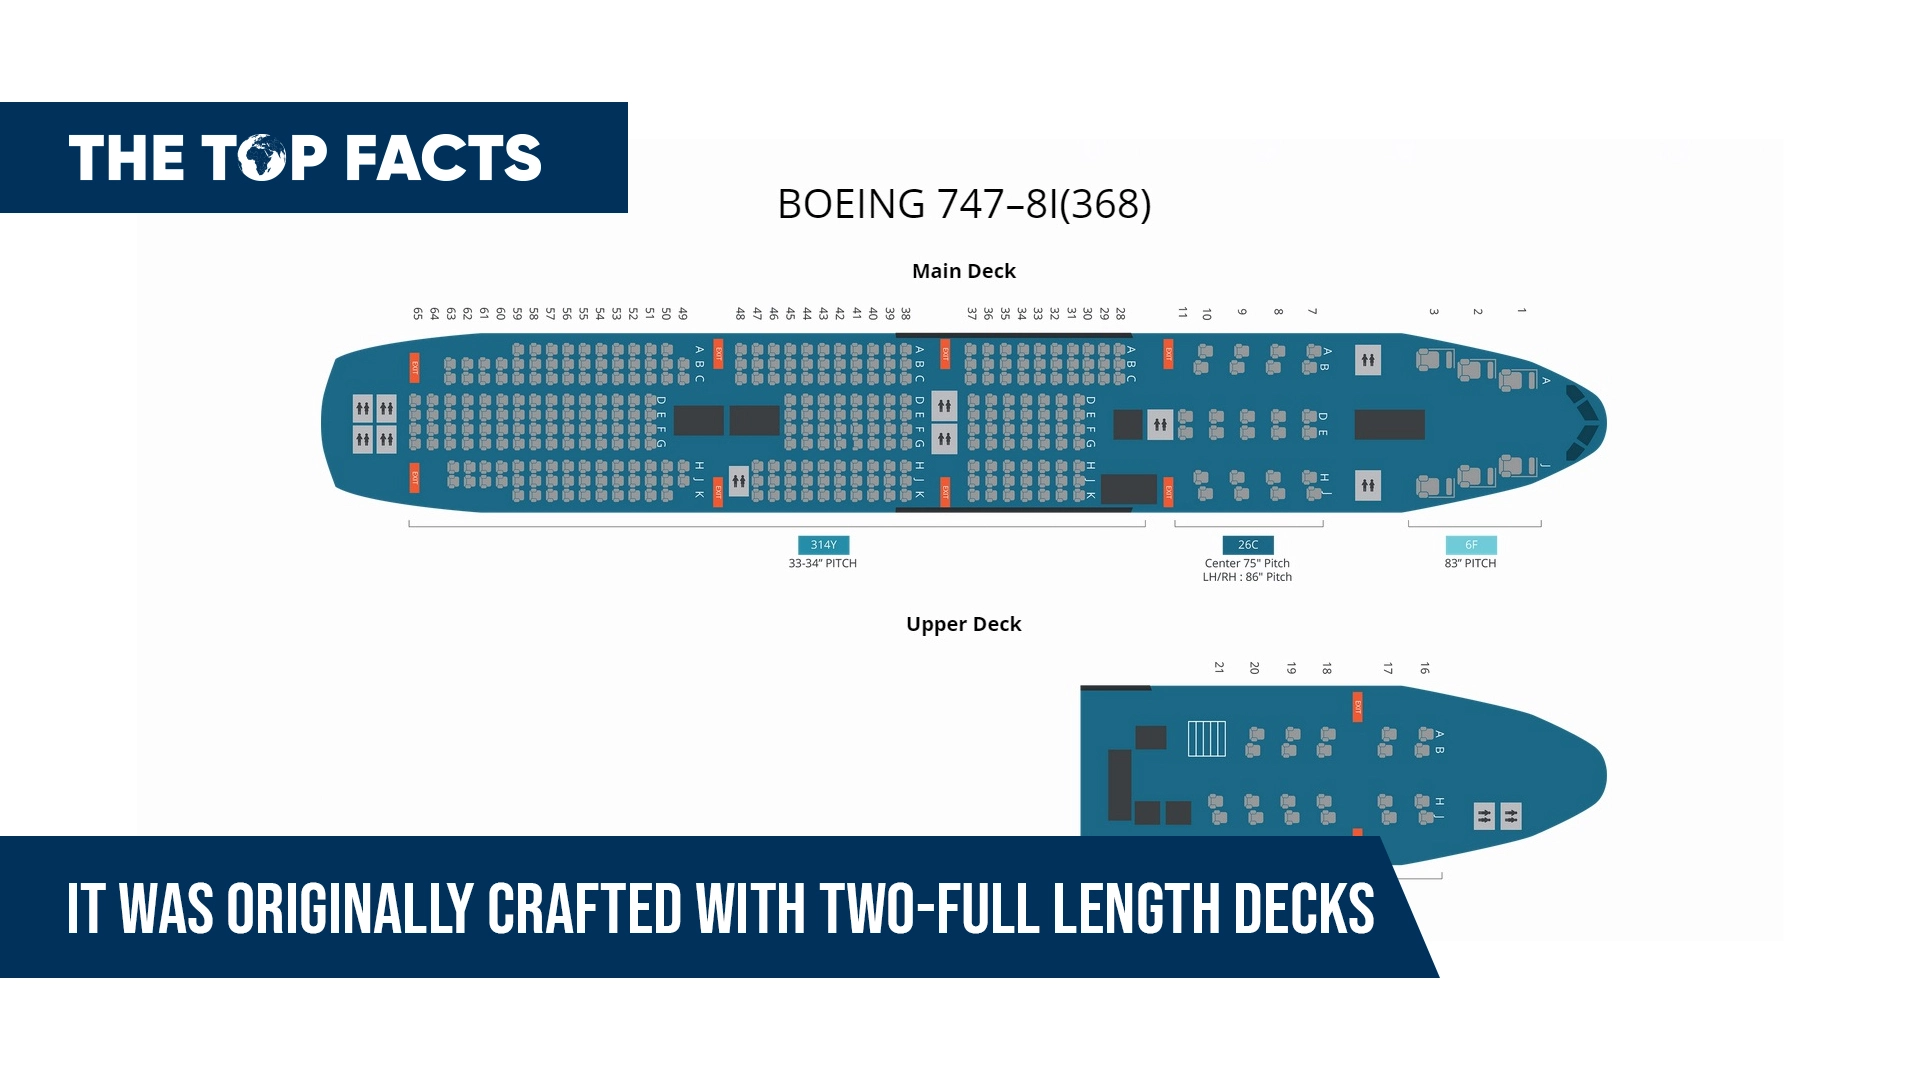 The plane was designed with two decks that extended the full length of the aircraft.